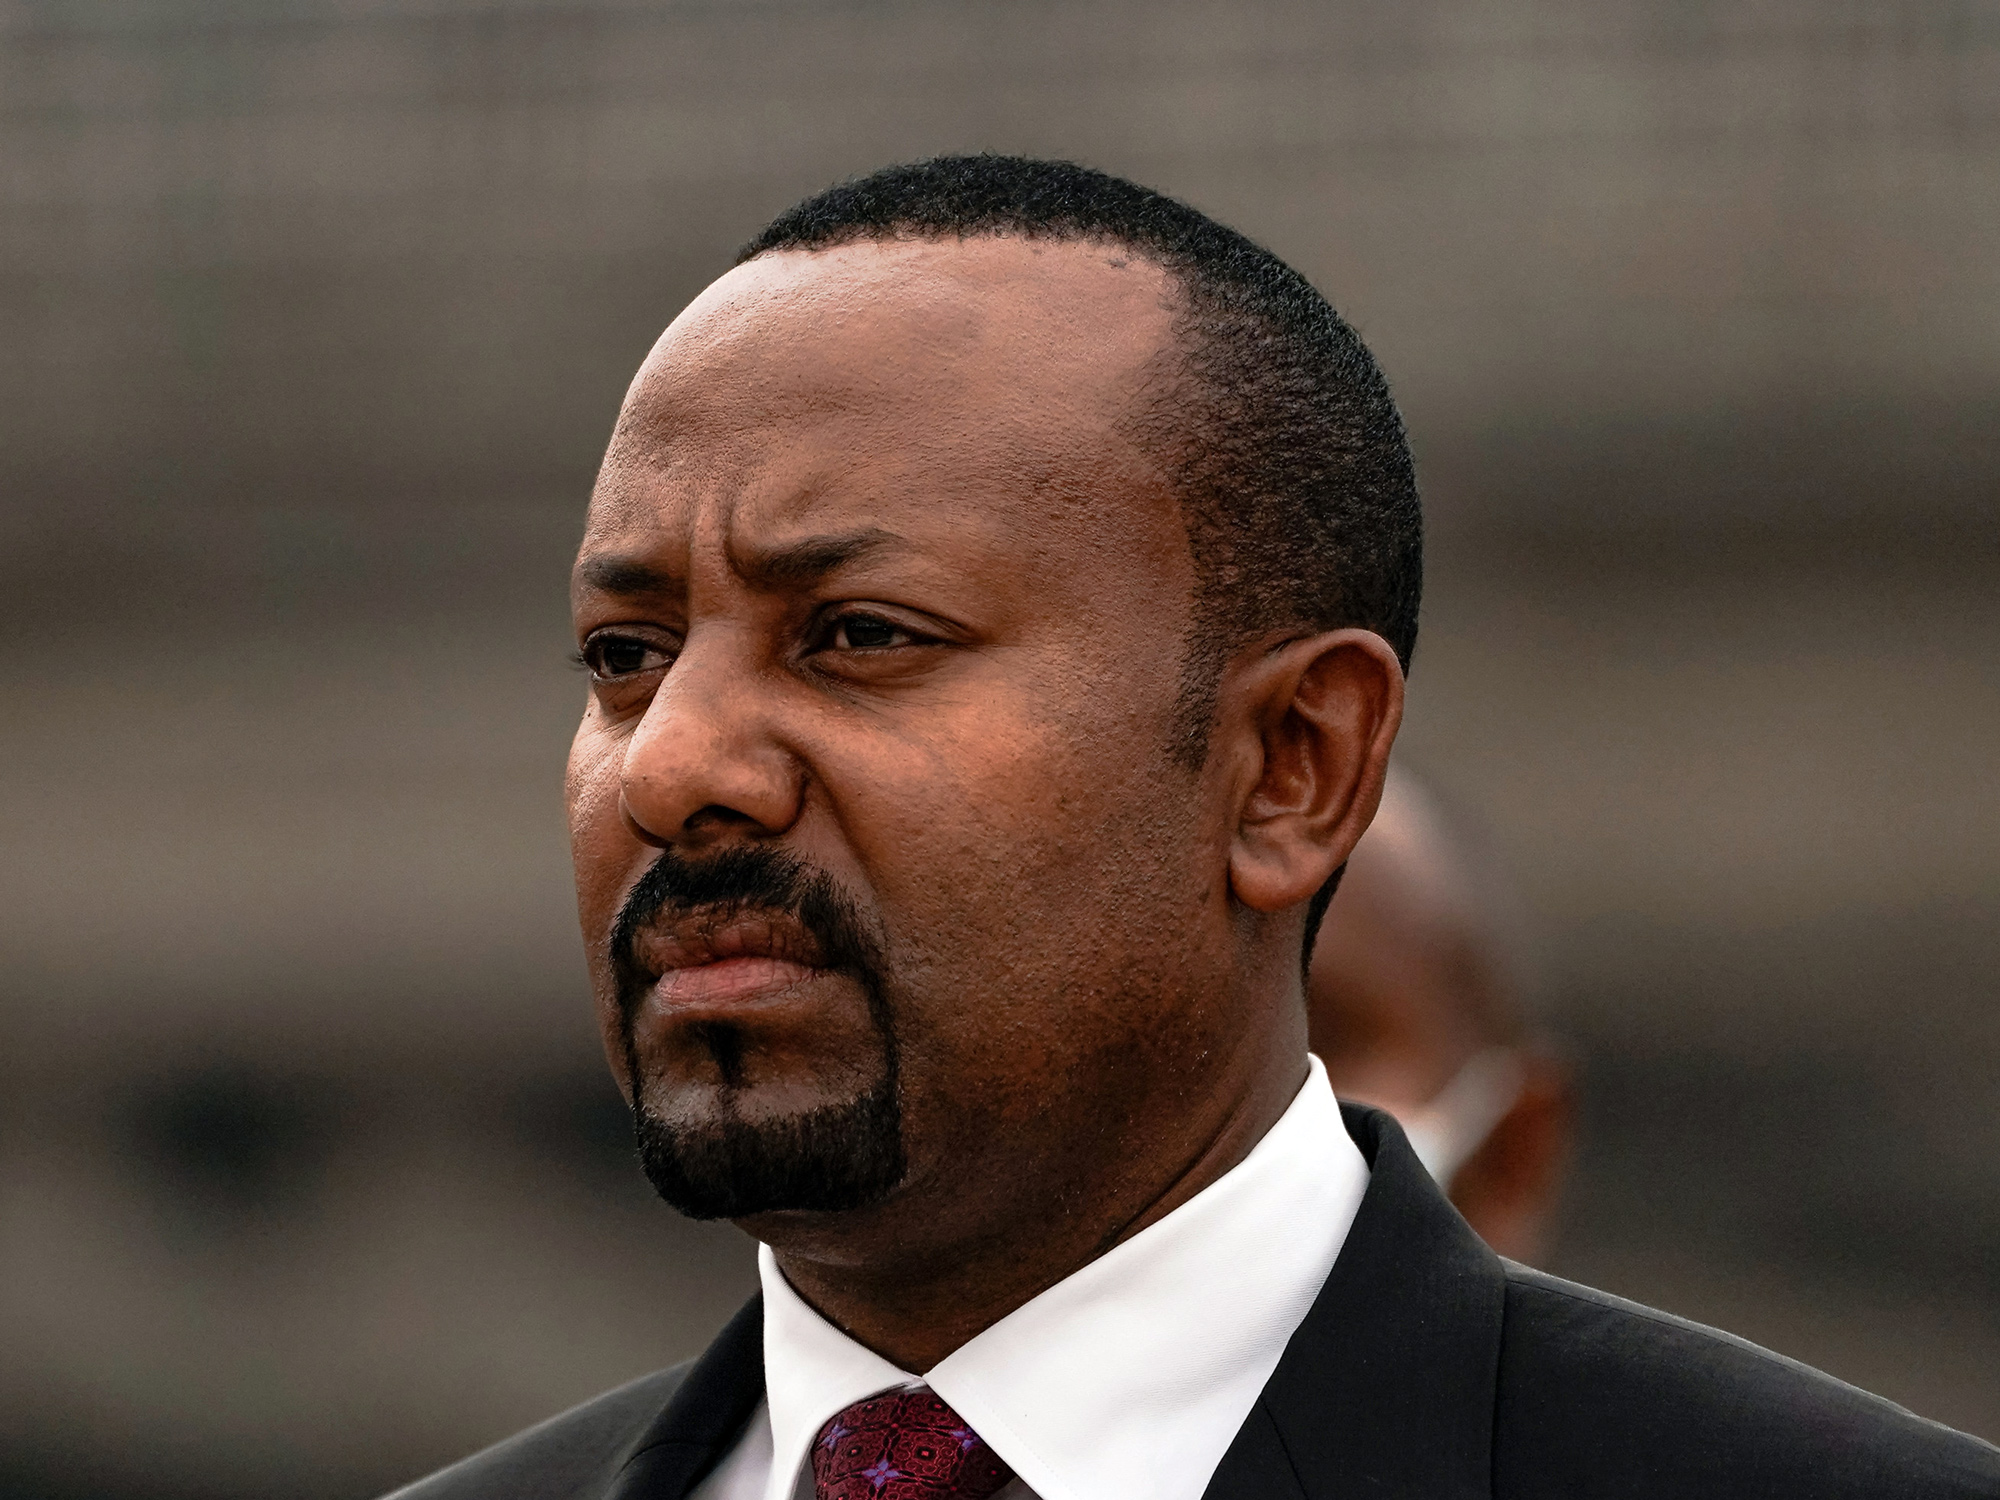 ADDIS ABABA, ETHIOPIA - JUNE 13:  Ethiopian Prime Minister Abiy Ahmed attends the inauguration of the newly remodeled Meskel Square on June 13, 2021 in Addis Ababa, Ethiopia. Prime Minister Abiy Ahmed is seeking reelection in the upcoming national and regional parliamentary elections, which could lead to the country's first democratic transfer of power, after the original date of August 2020 was postponed amid the Covid-19 pandemic. (Photo by Jemal Countess/Getty Images)